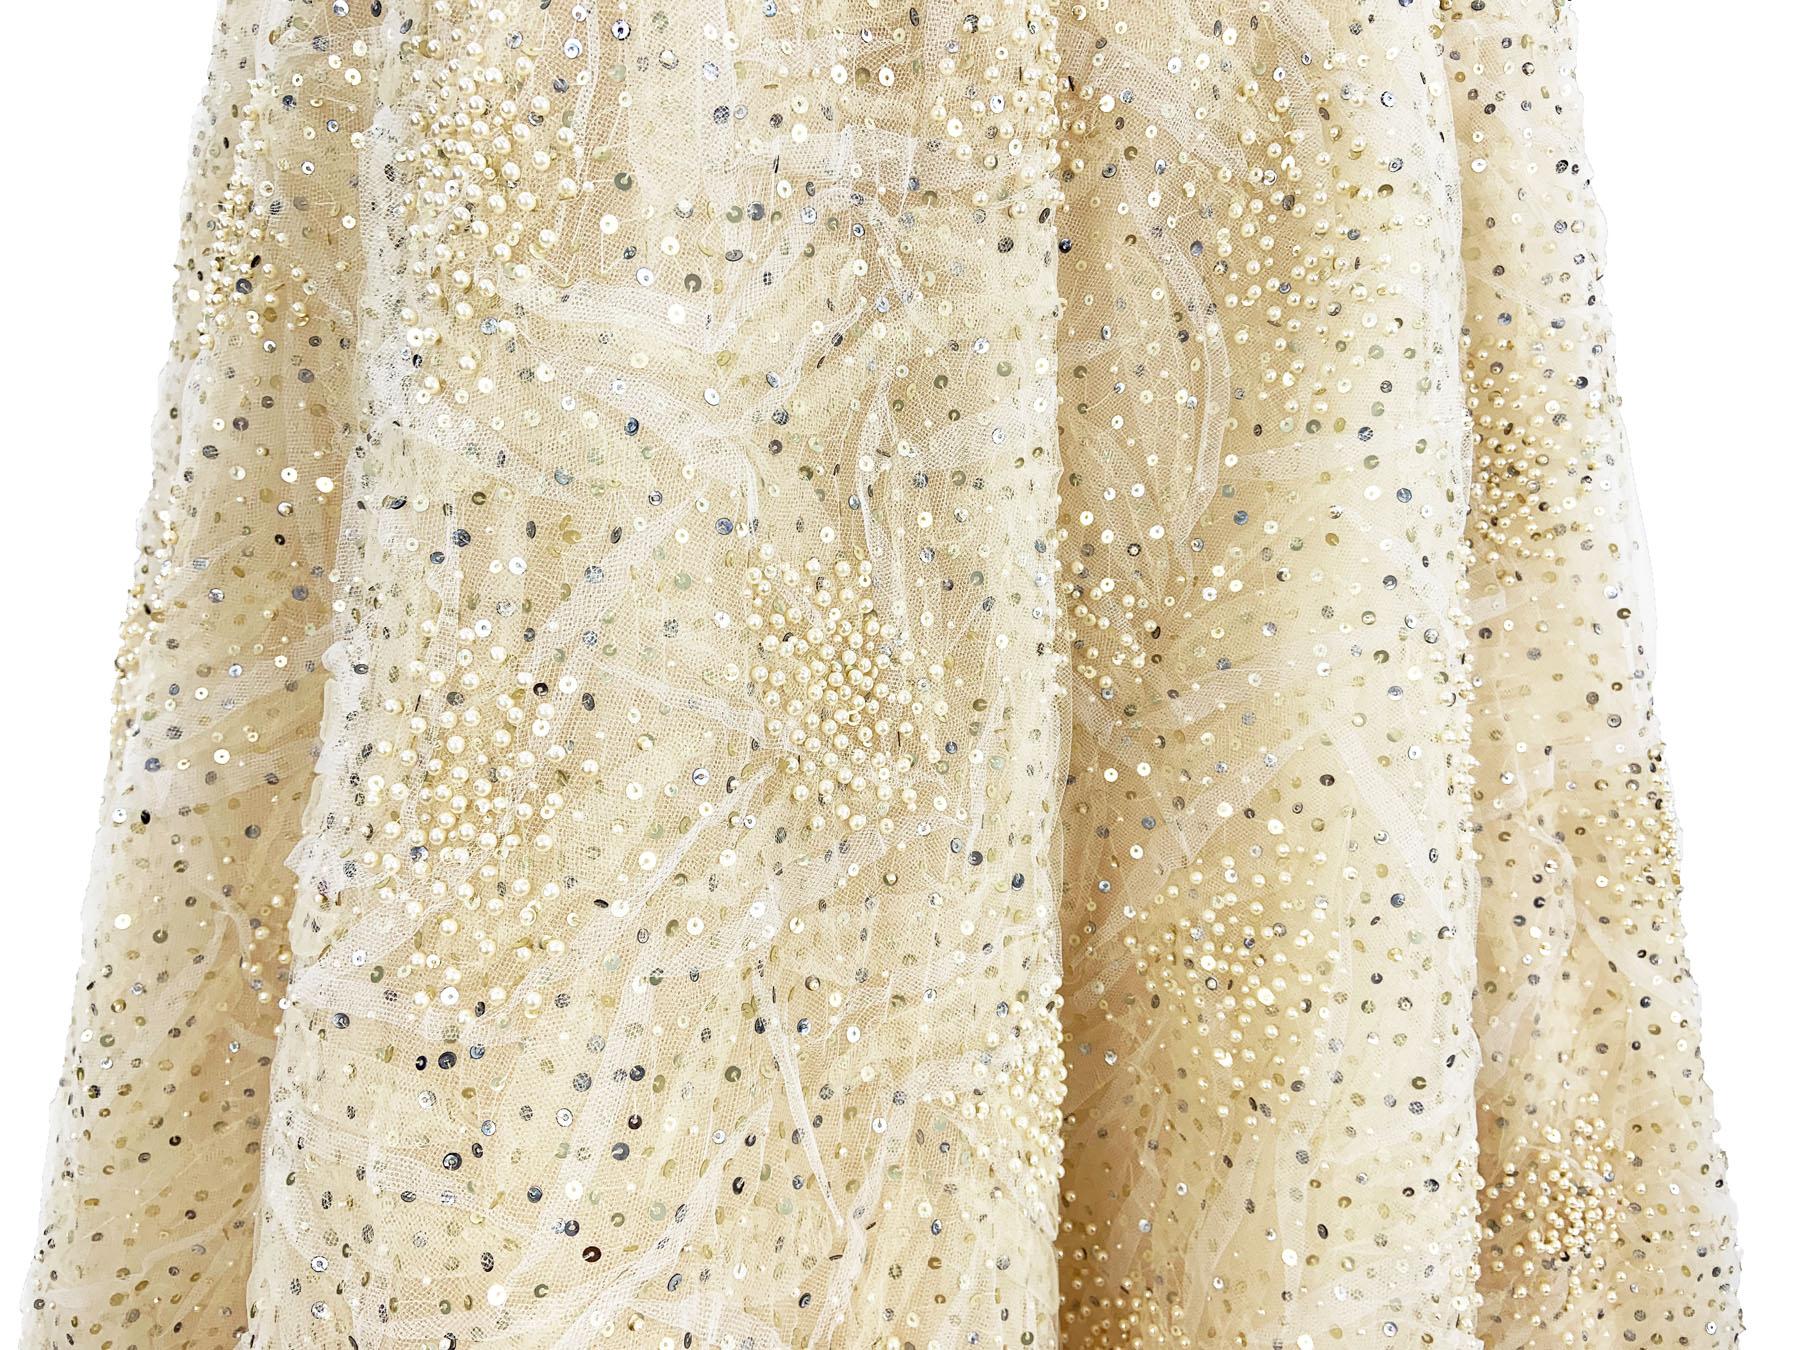 Women's NWT Oscar de la Renta 2008 Collection Champagne Fully Beaded Dress Gown US 8 For Sale